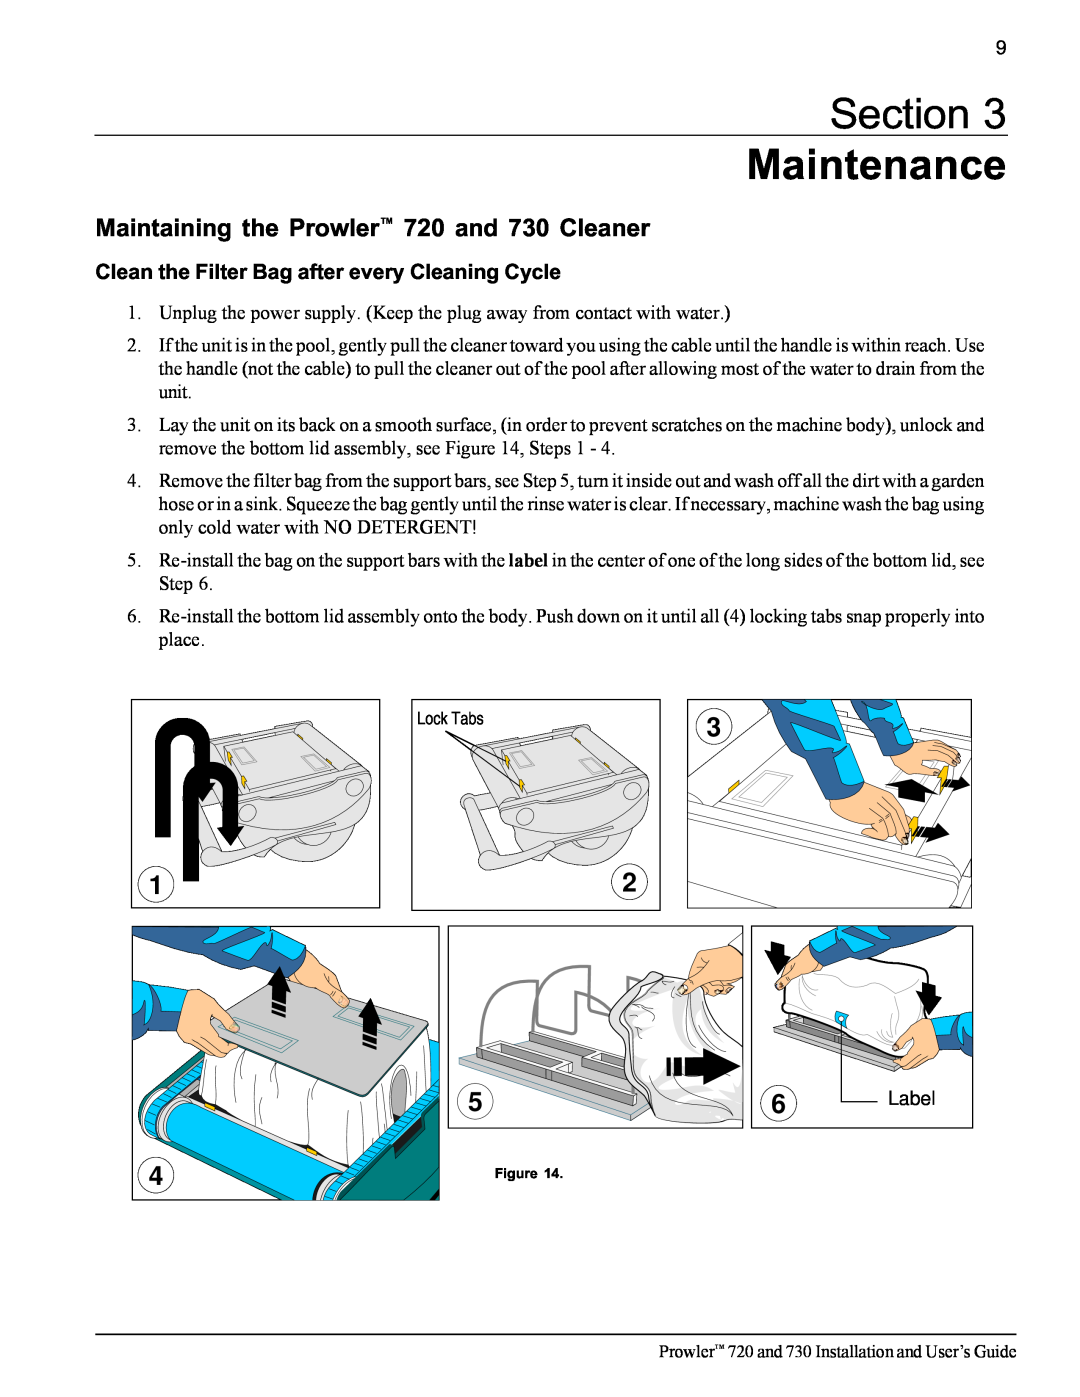 Pentair important safety instructions Section Maintenance, Maintaining the Prowler 720 and 730 Cleaner 